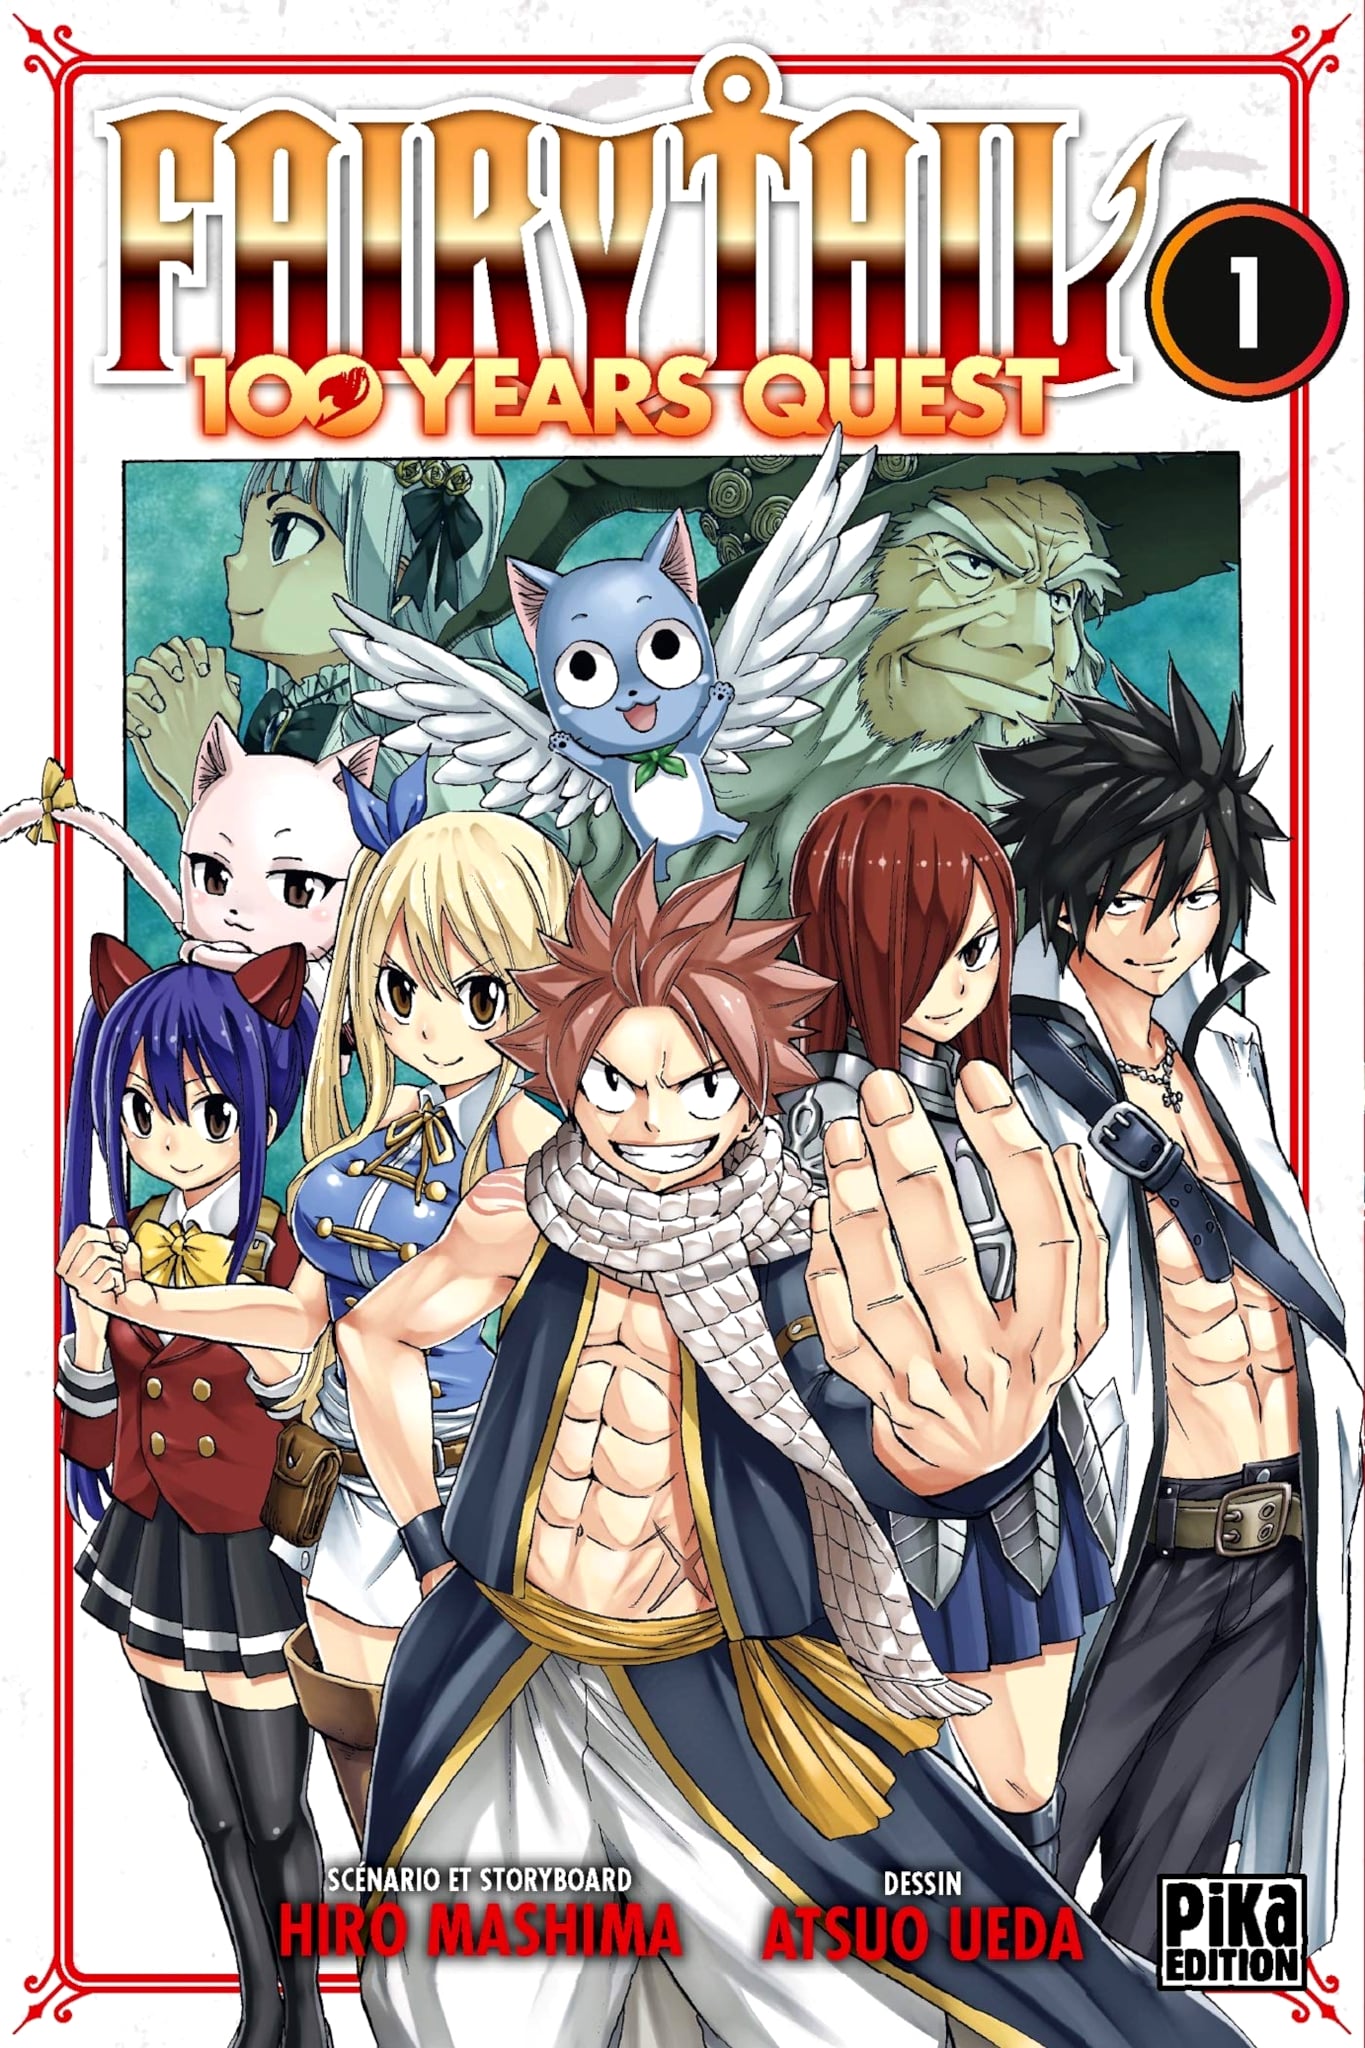 Tome 1 du manga Fairy Tail : 100 Years Quest